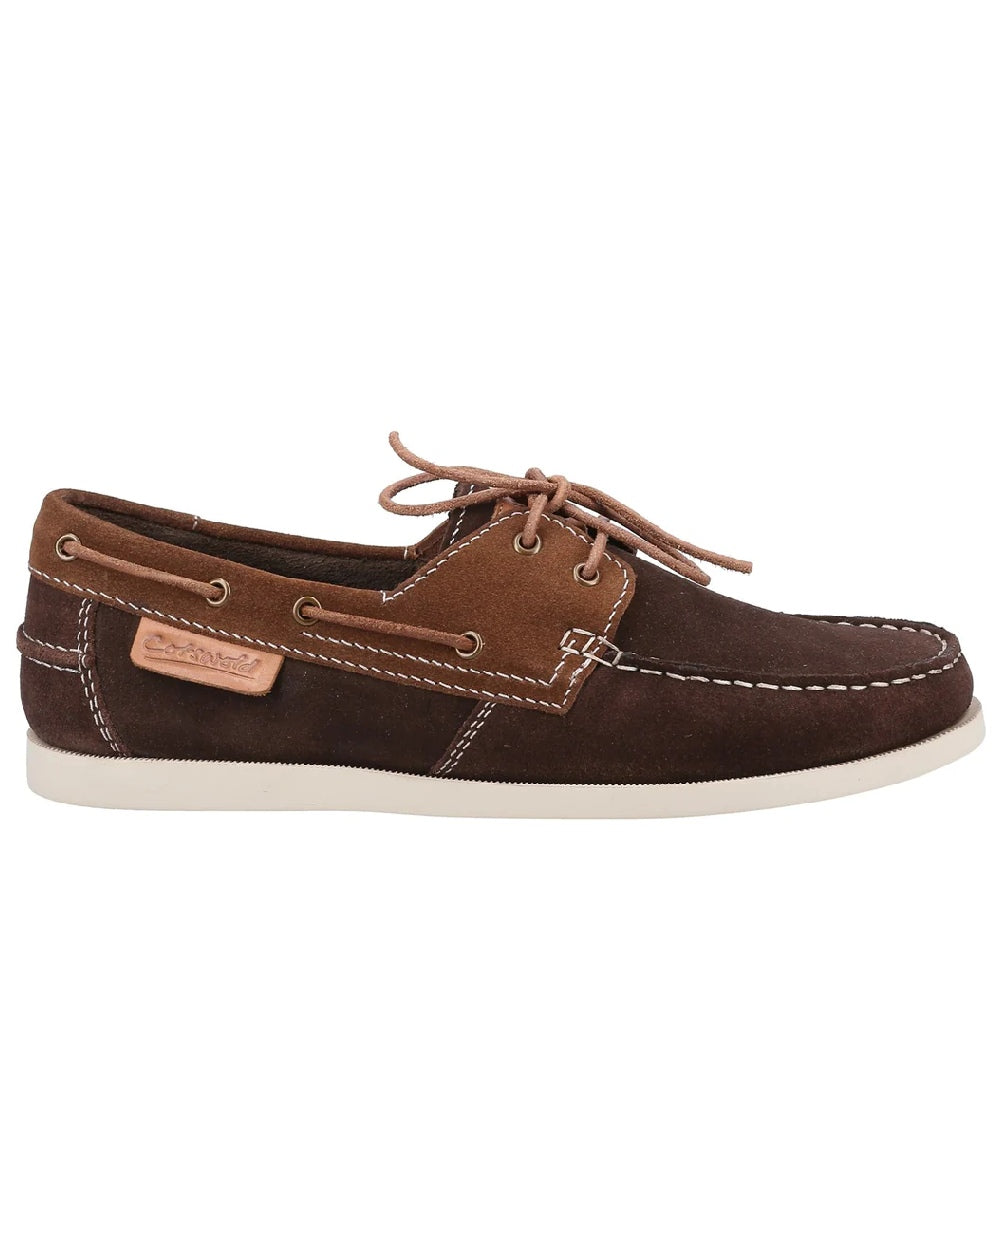 Cotswold Mitcheldean Boat Shoes in Chocolate